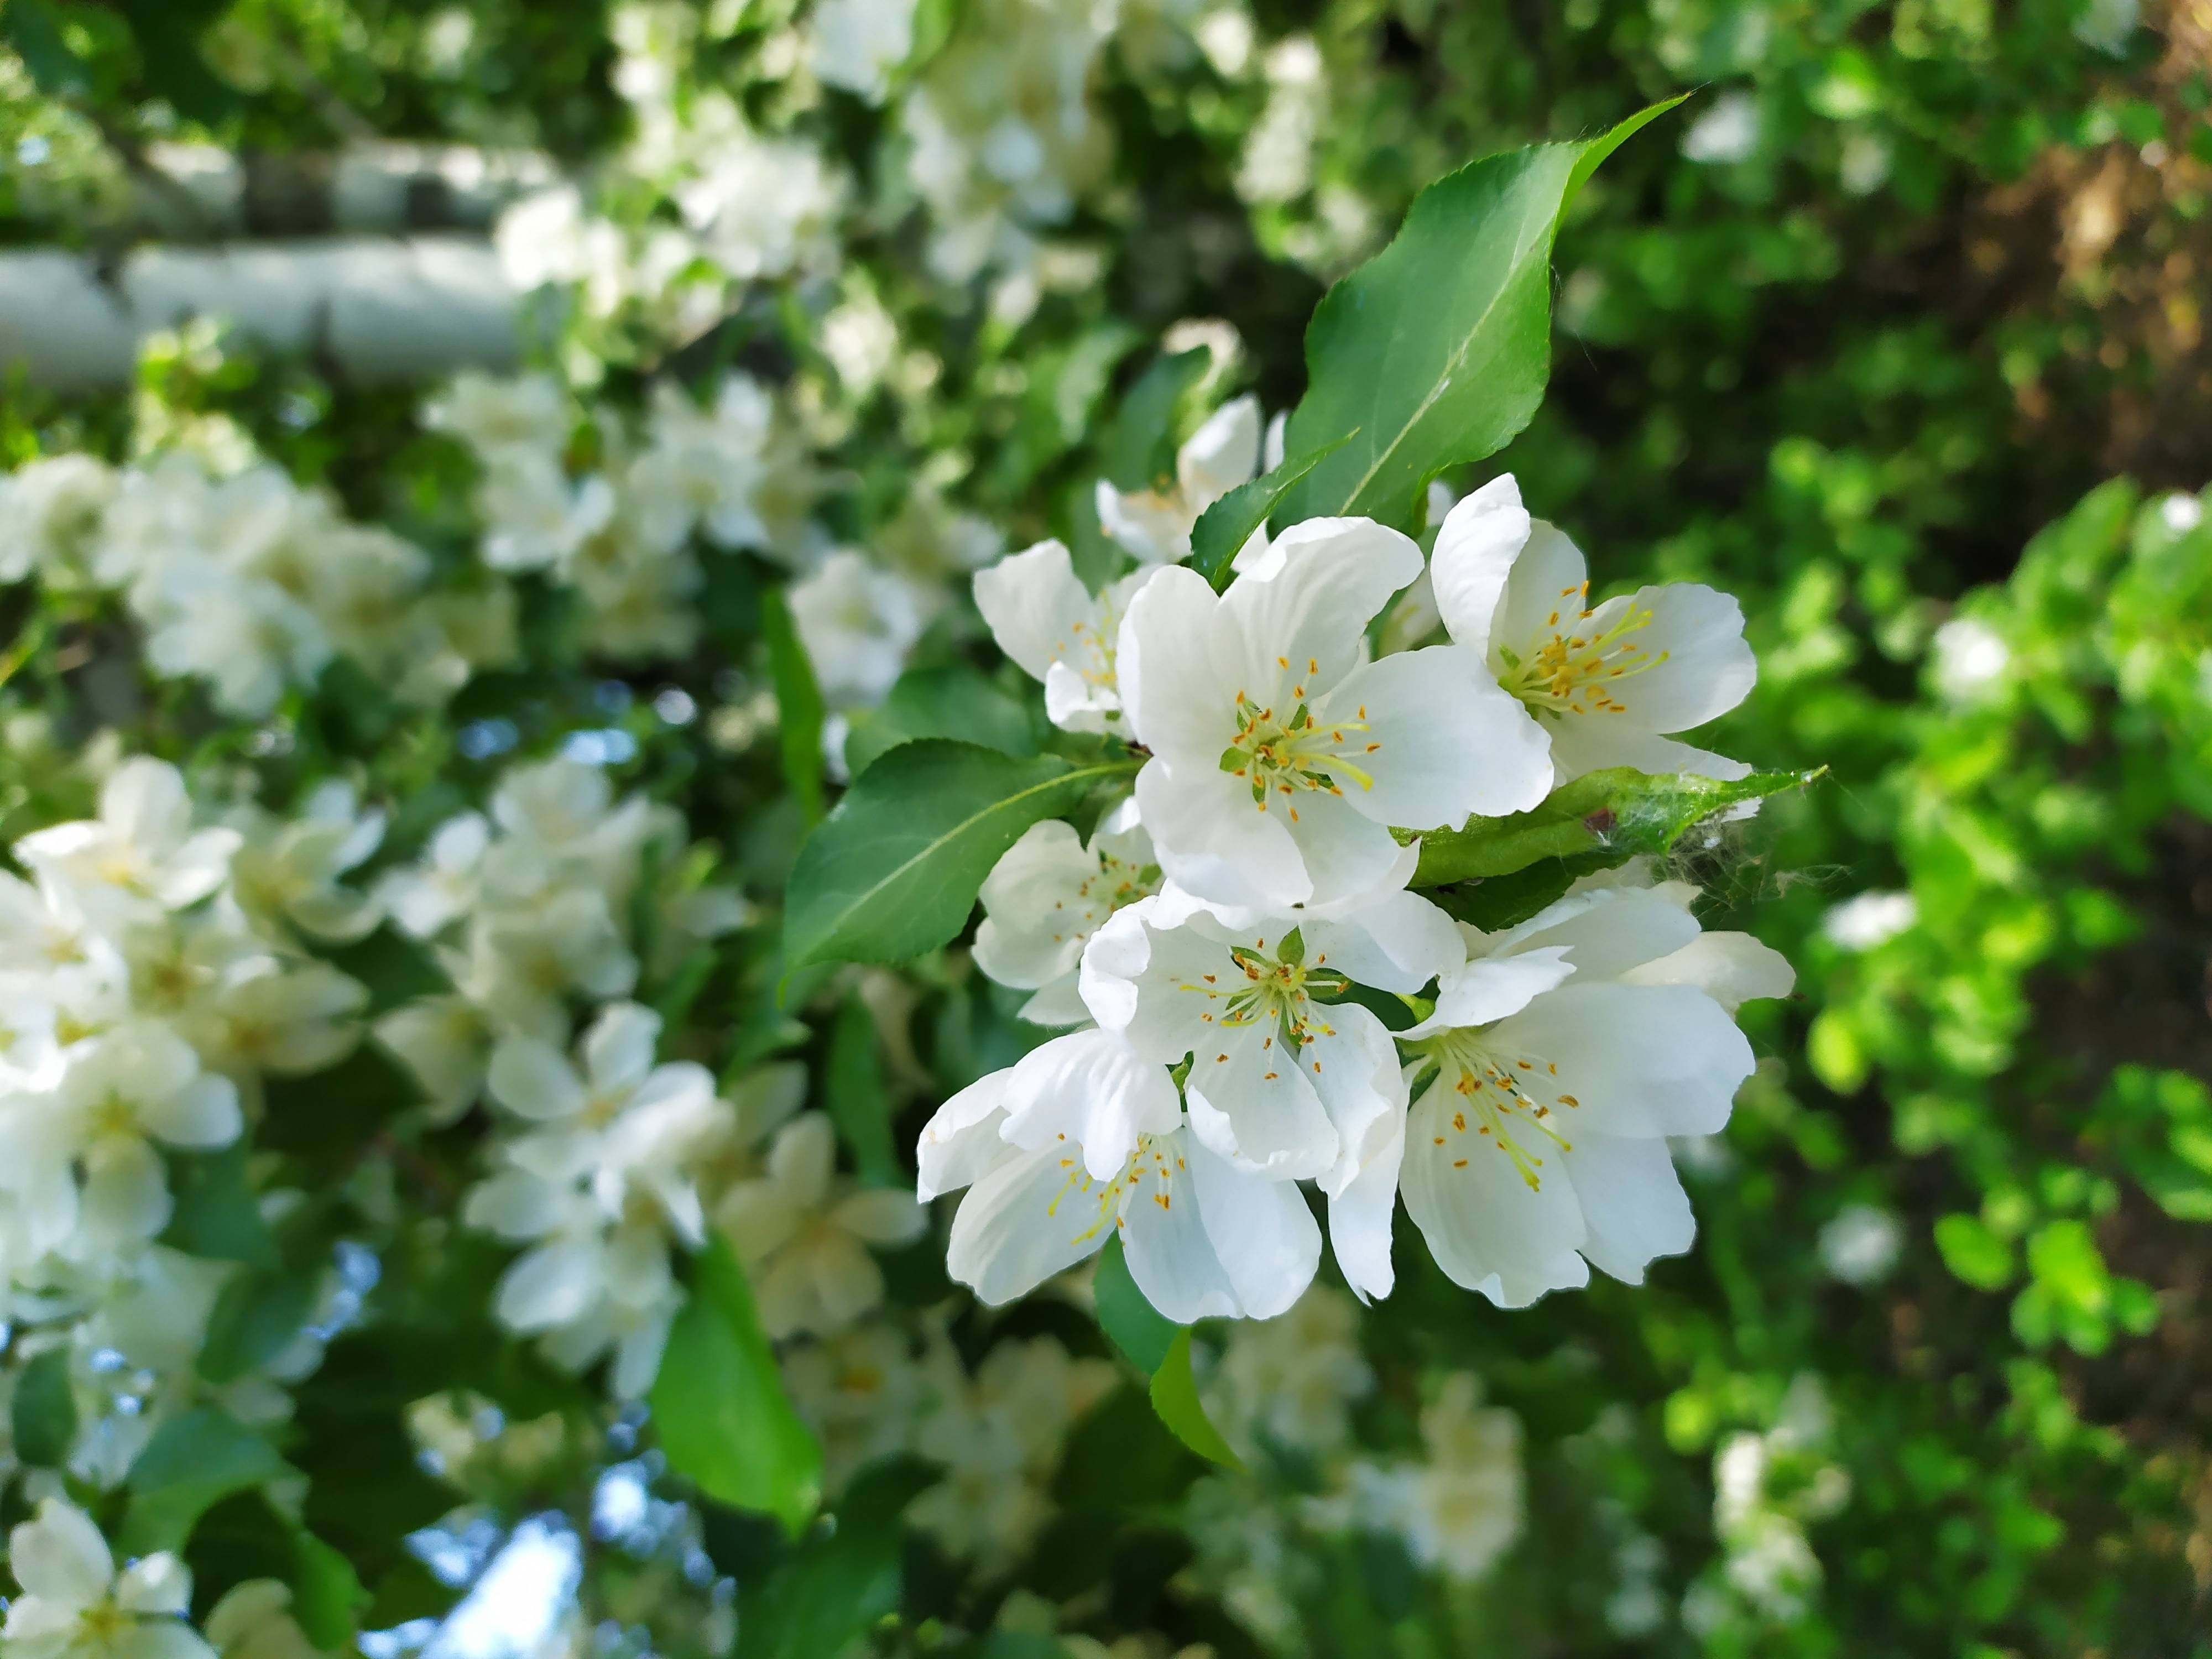 clusters of white flowers with yellow stamens, and green, shiny ovate leaves